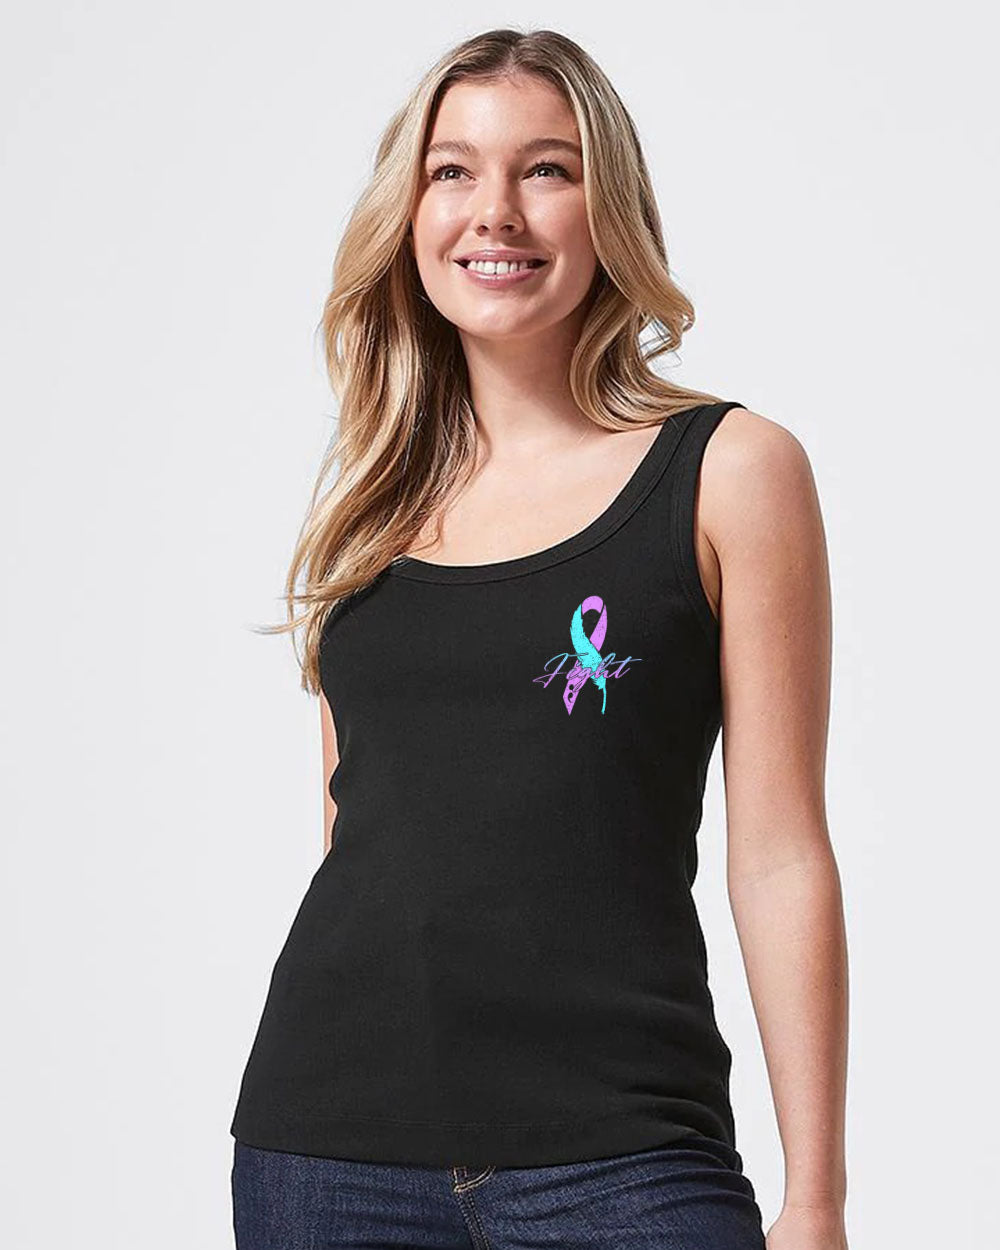 Not All Wounds Are Visible Women's Suicide Prevention Awareness Tanks